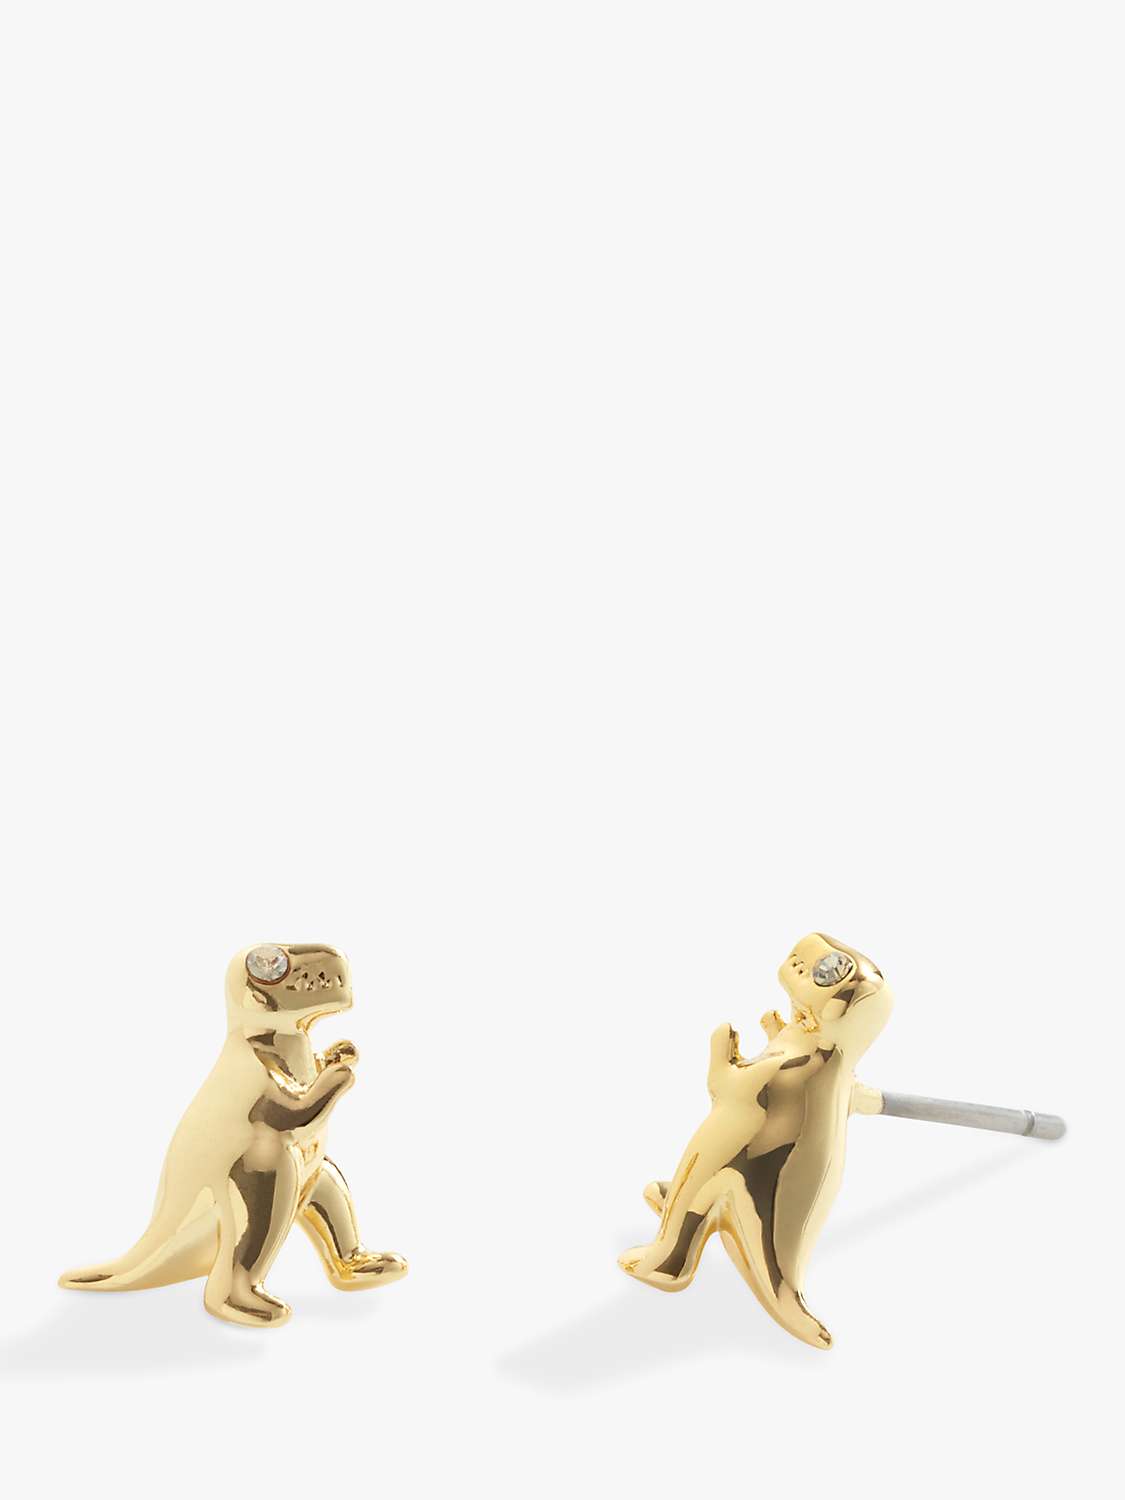 Buy Coach Rexy Dino Stud Earrings, Gold Online at johnlewis.com